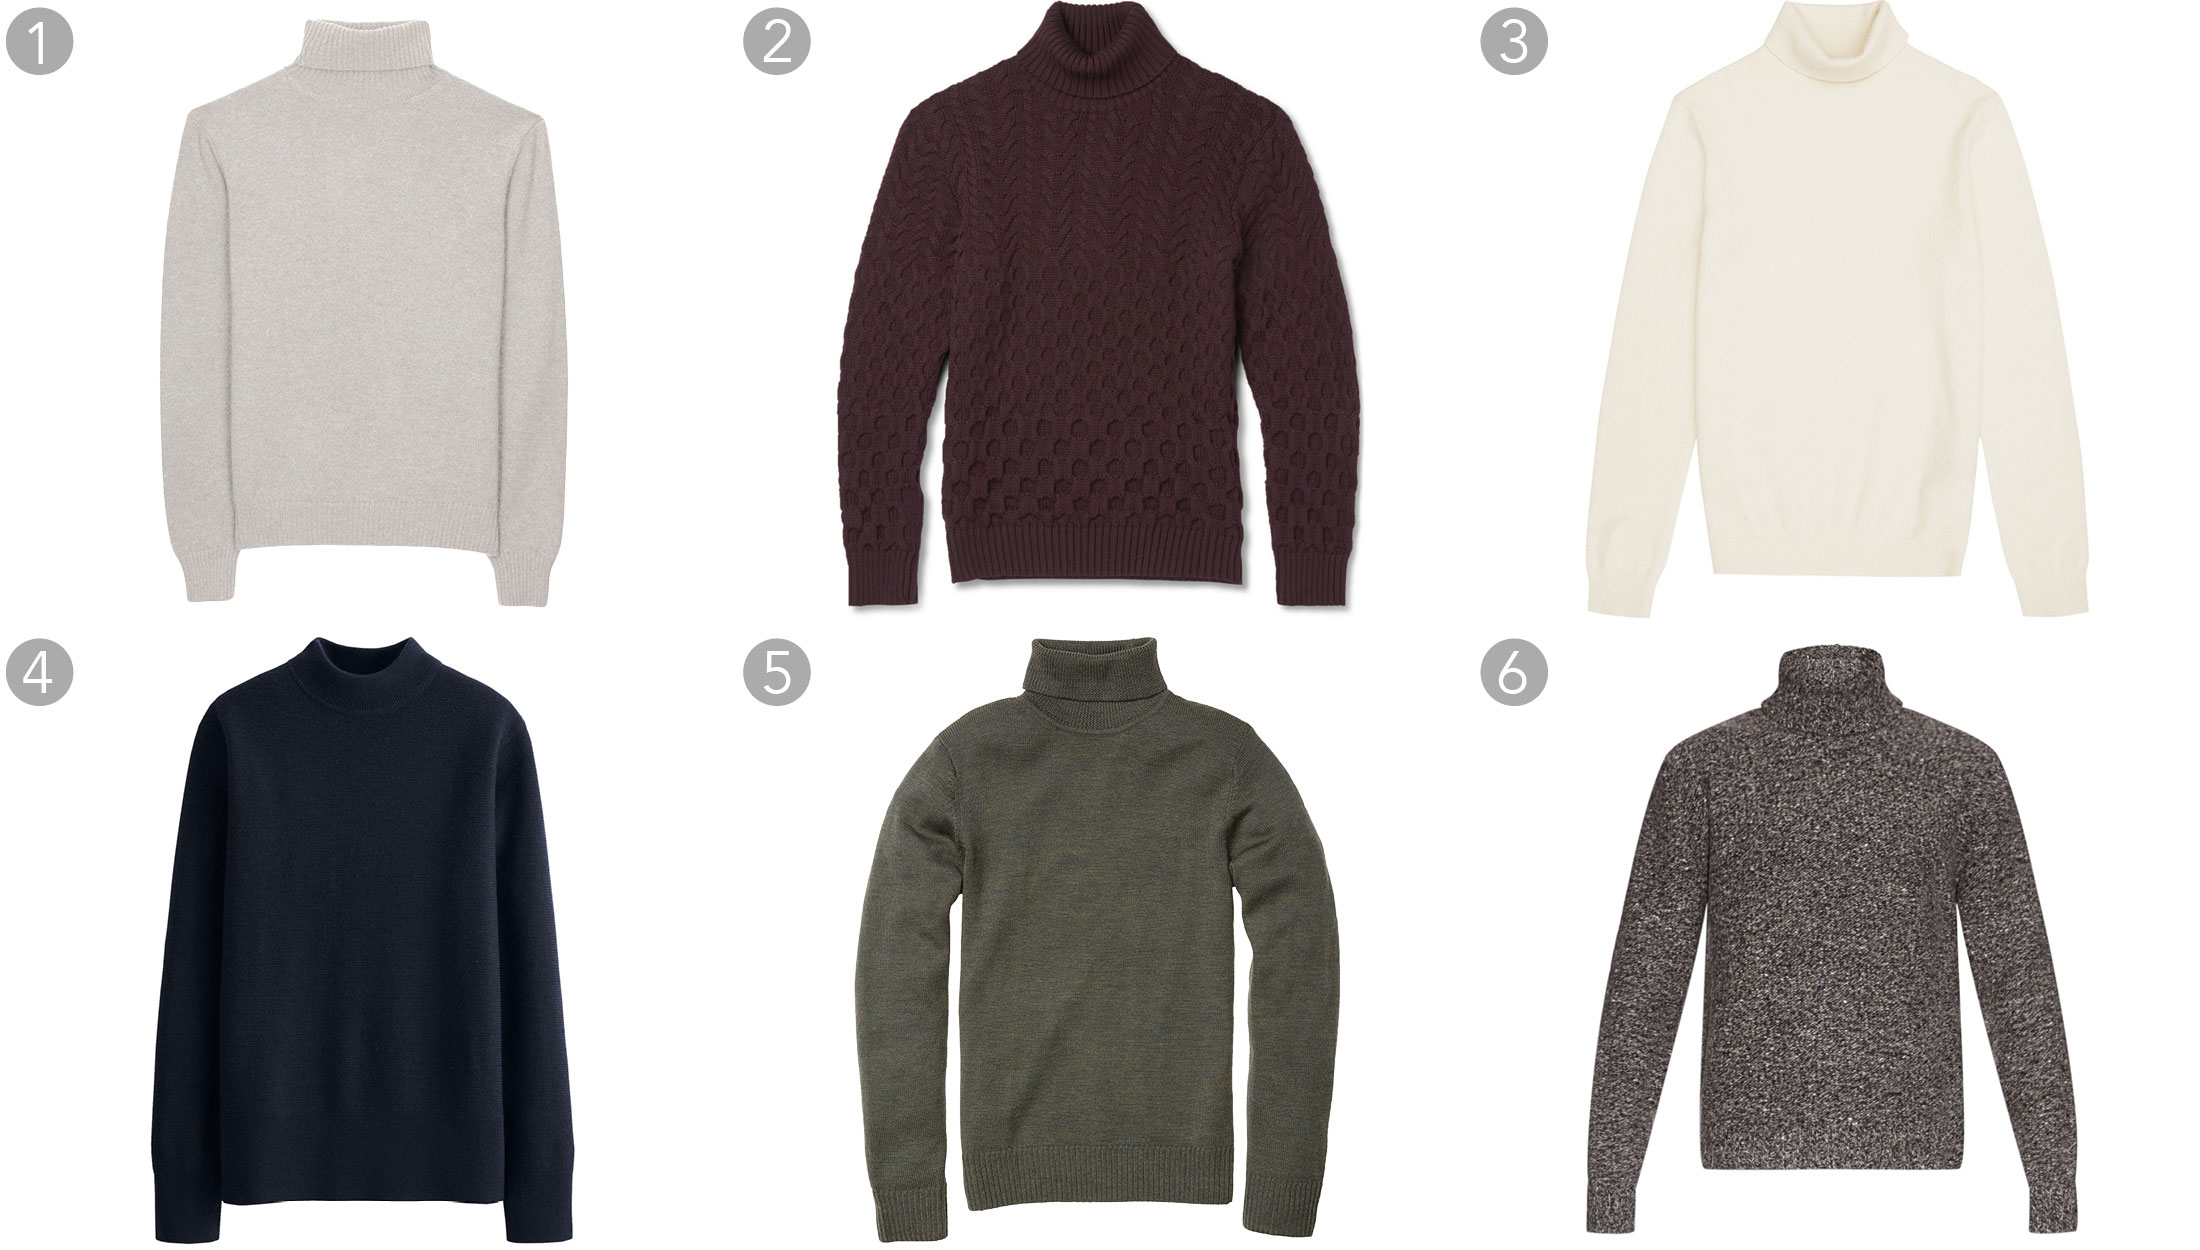 Men's Fine-knit Turtleneck Sweater Perfect for Casual or Formal Events six  Colors Black, Blue, Burgundy, Khaki, Mustard, White -  Hong Kong